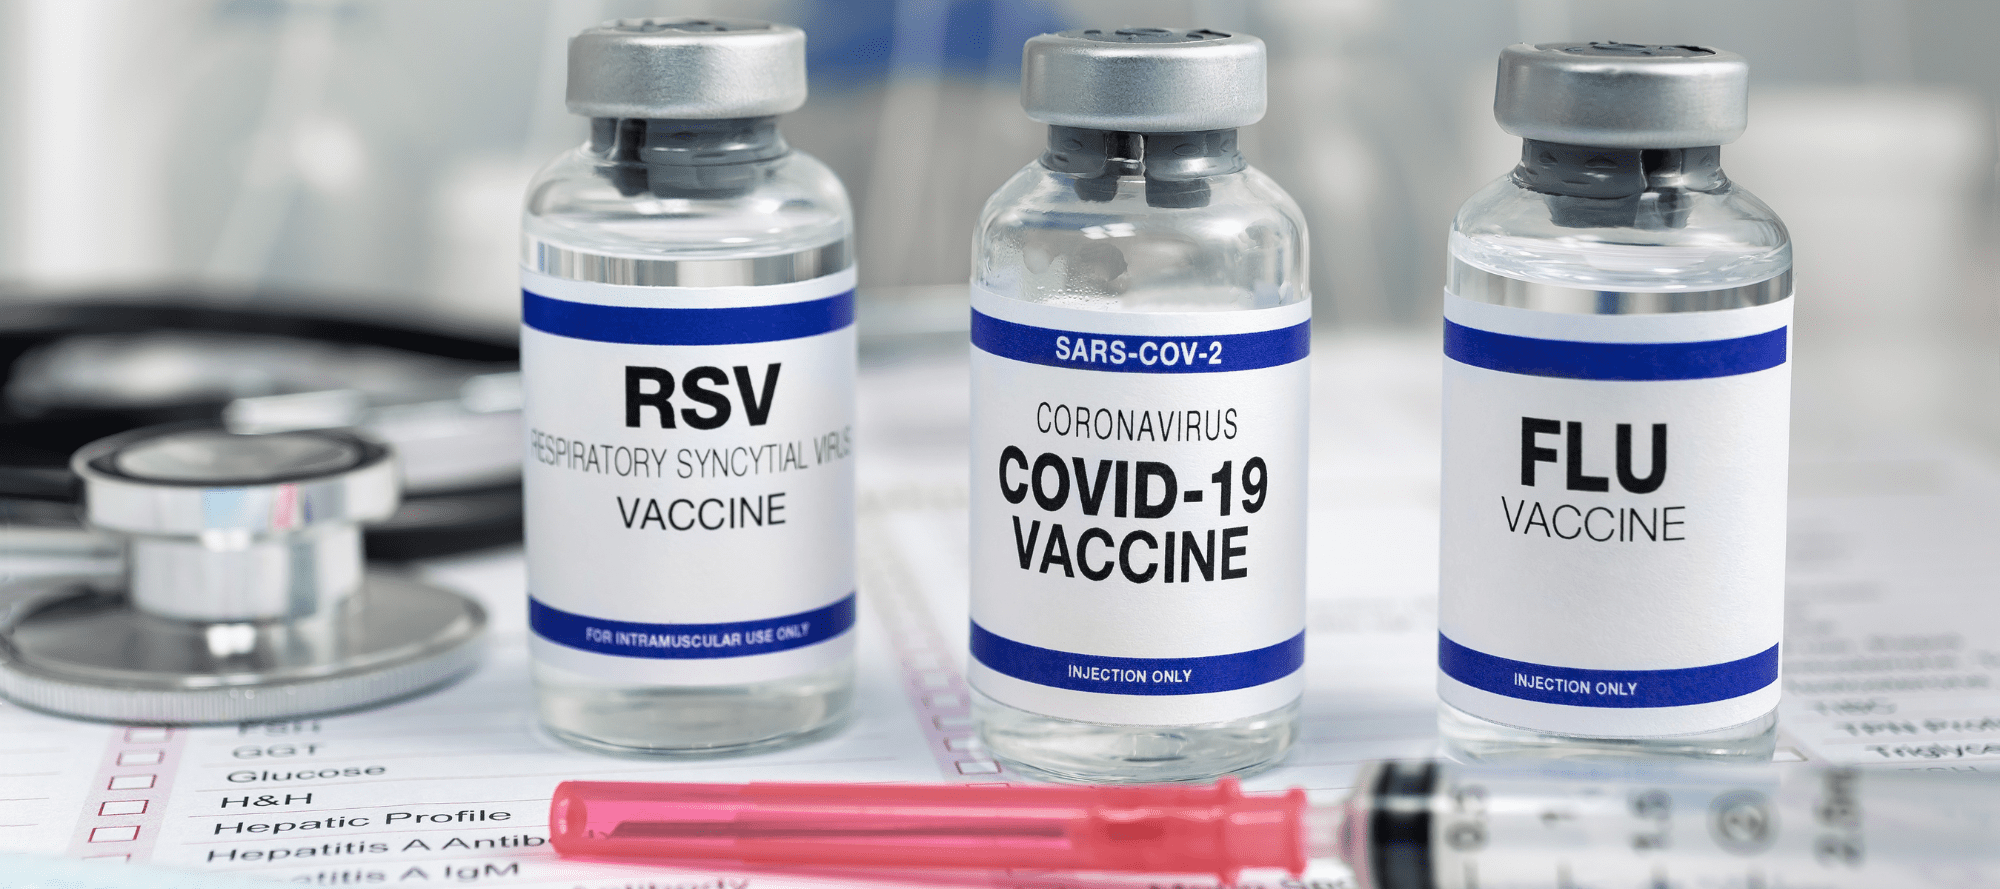 RSV, COVID-19 and Flu Vaccines in Vials